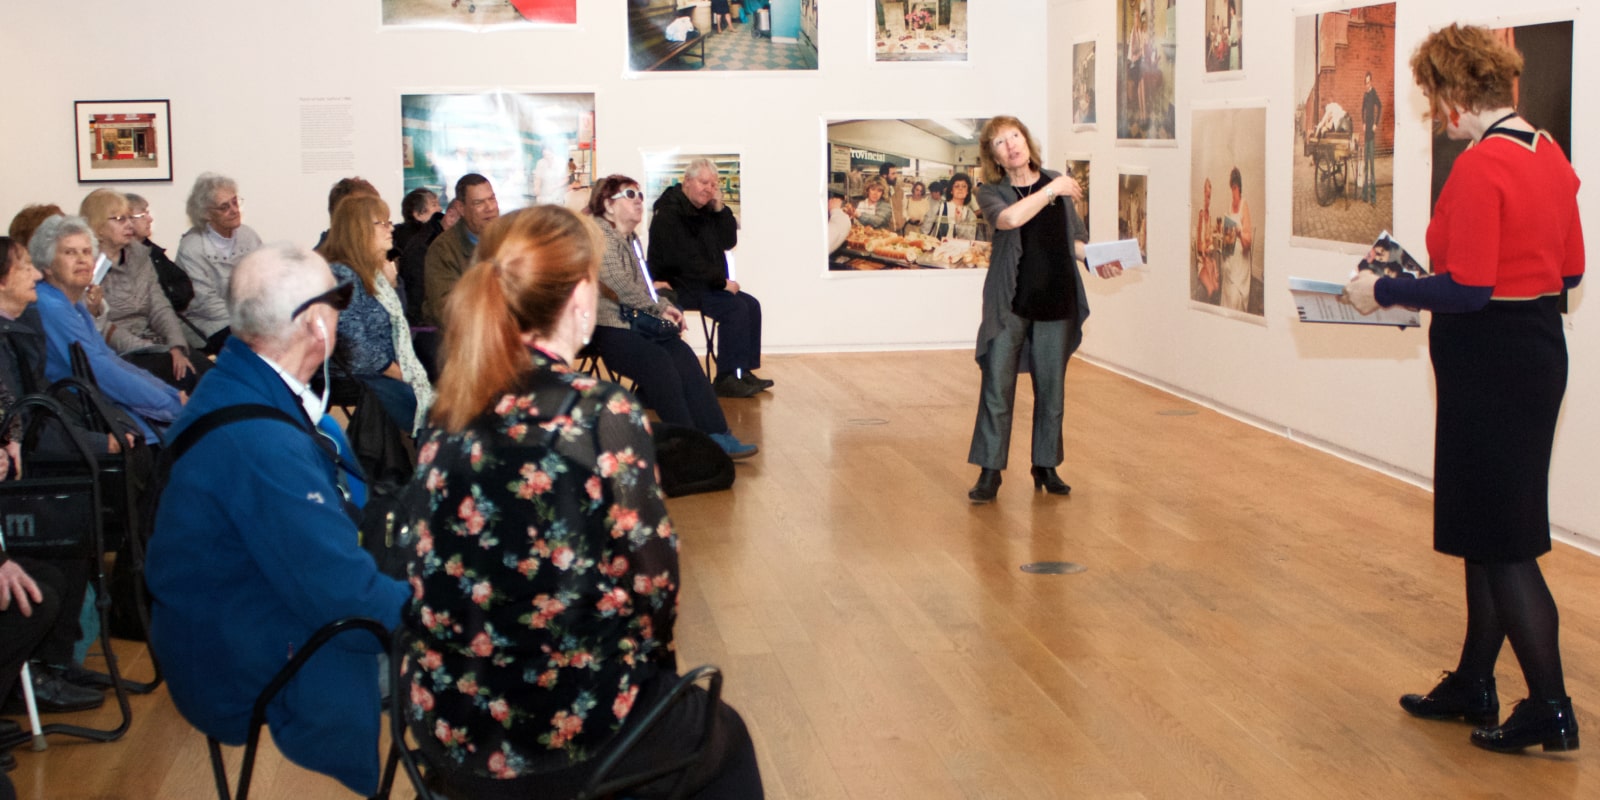 Anne Hornsby and colleagues deliver an audio described tour at Manchester Art Gallery